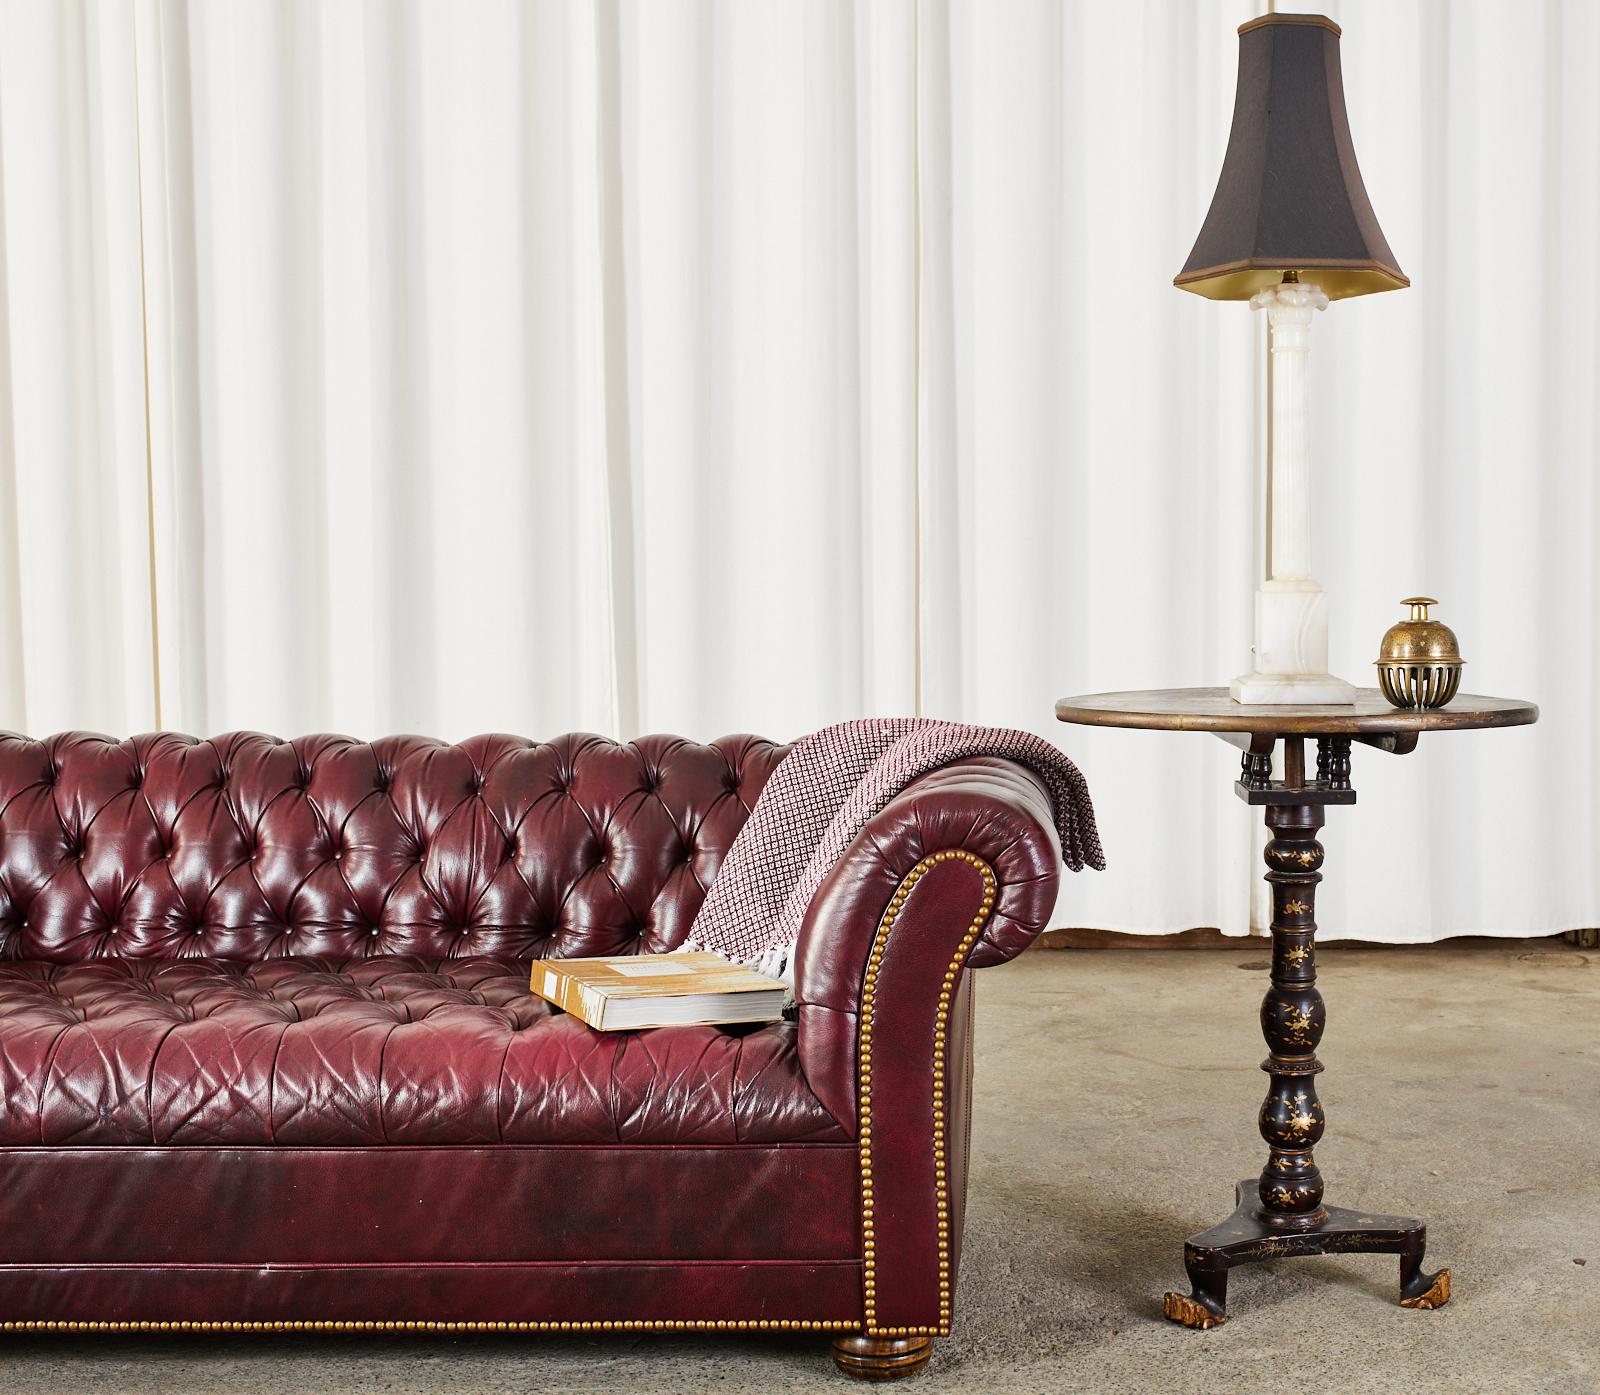 Classic English chesterfield sofa settee featuring an oxblood or cordovan tufted leather upholstery. The frame was crafted with large English rolled arms having a tufted leather seat, arms, and back. The front of the sofa has brass tack nail head